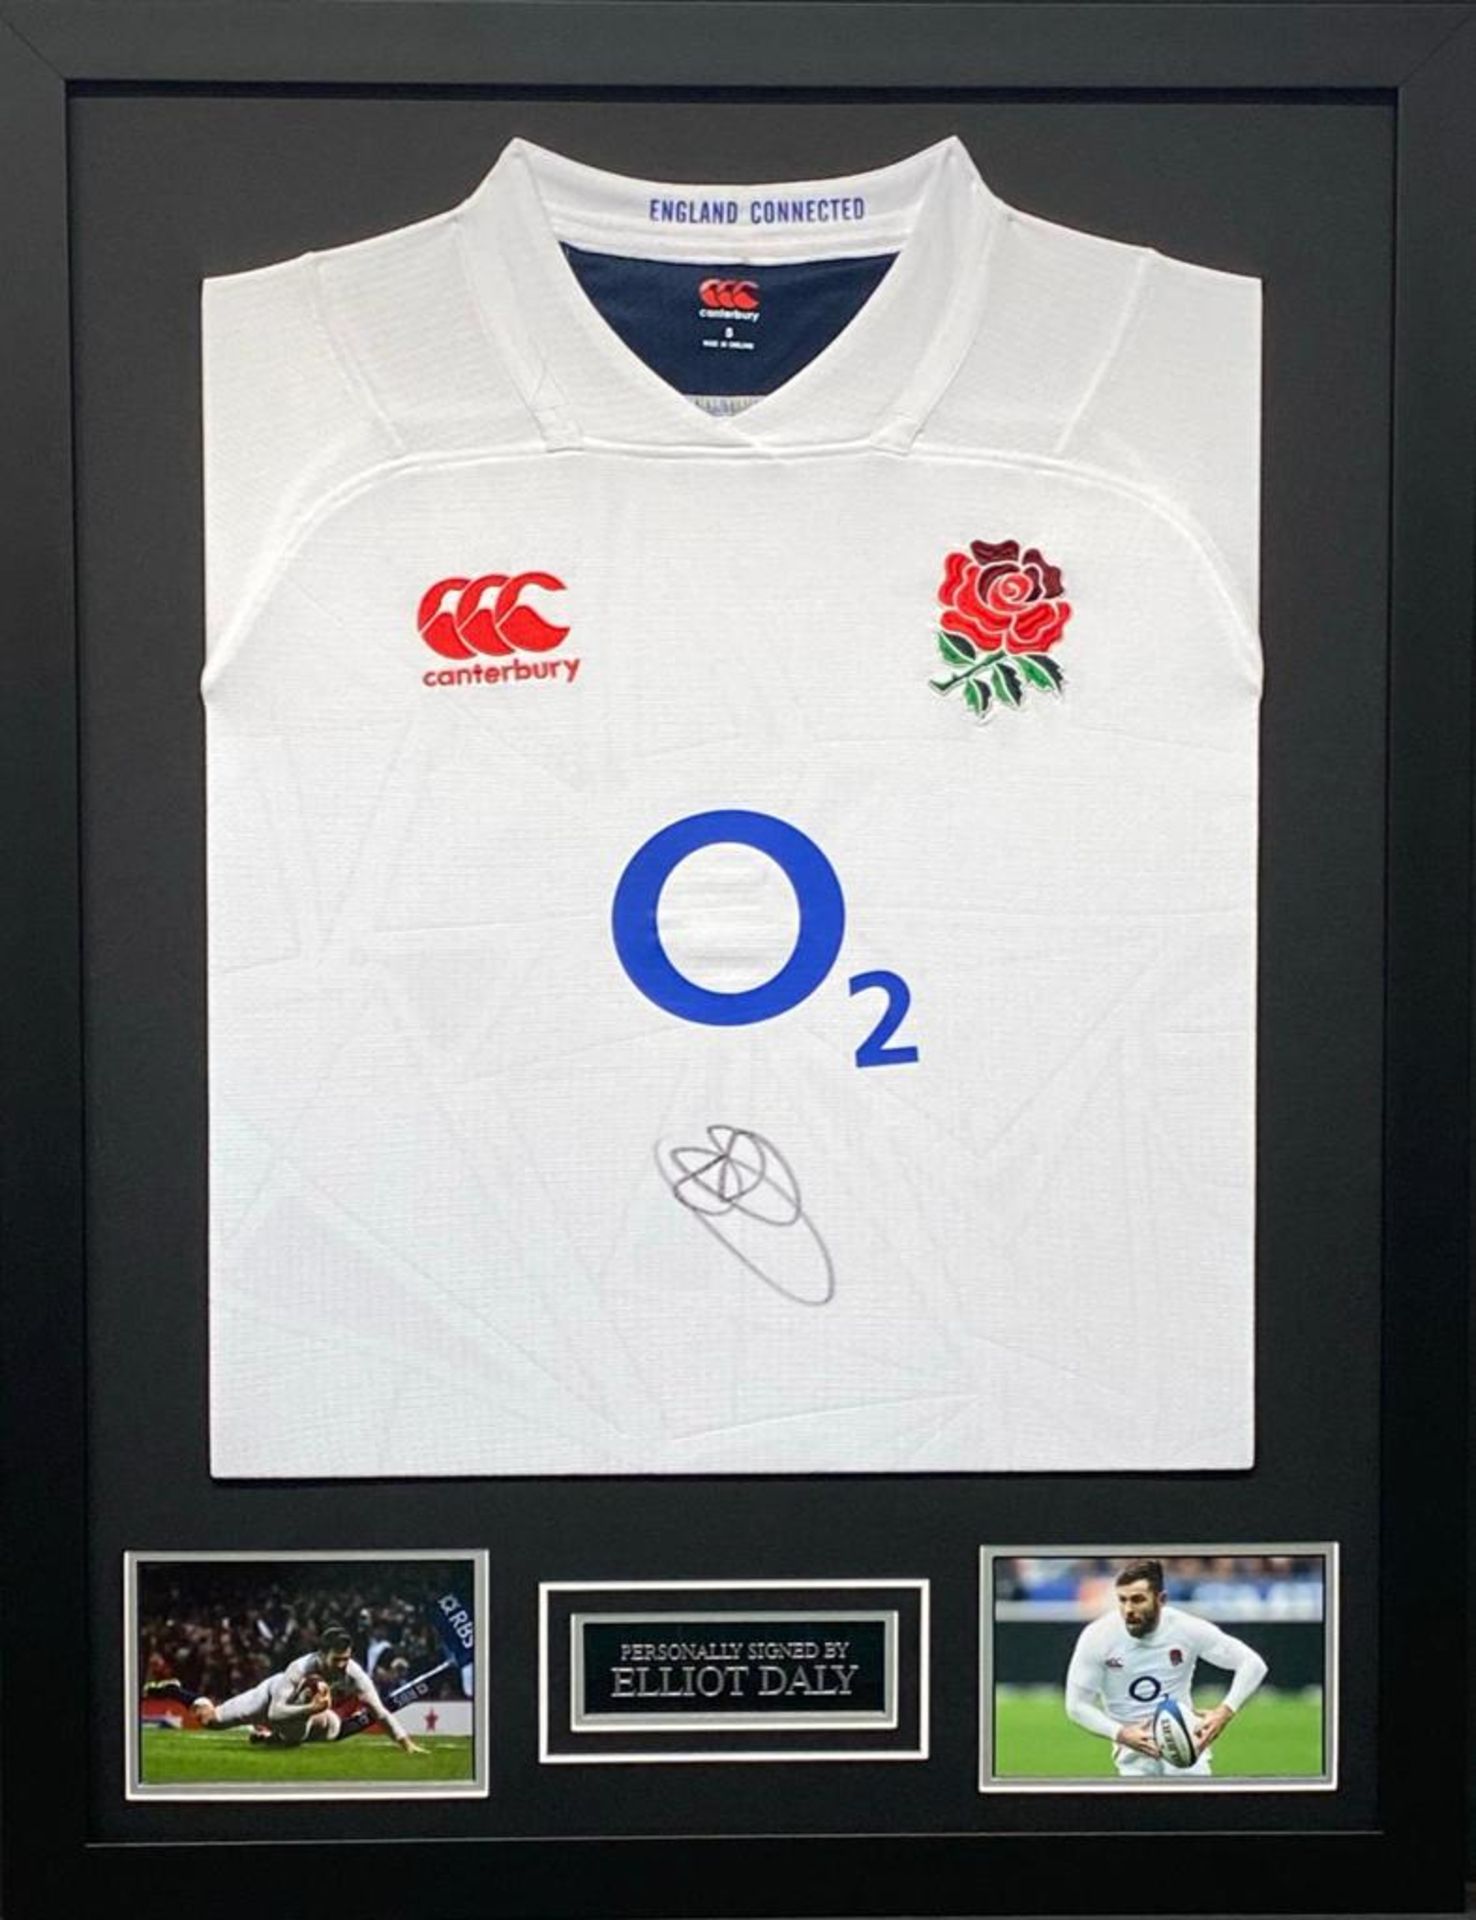 Elliot Daly Signed And Framed England Rugby Shirt Complete With Certificate Of Authenticity